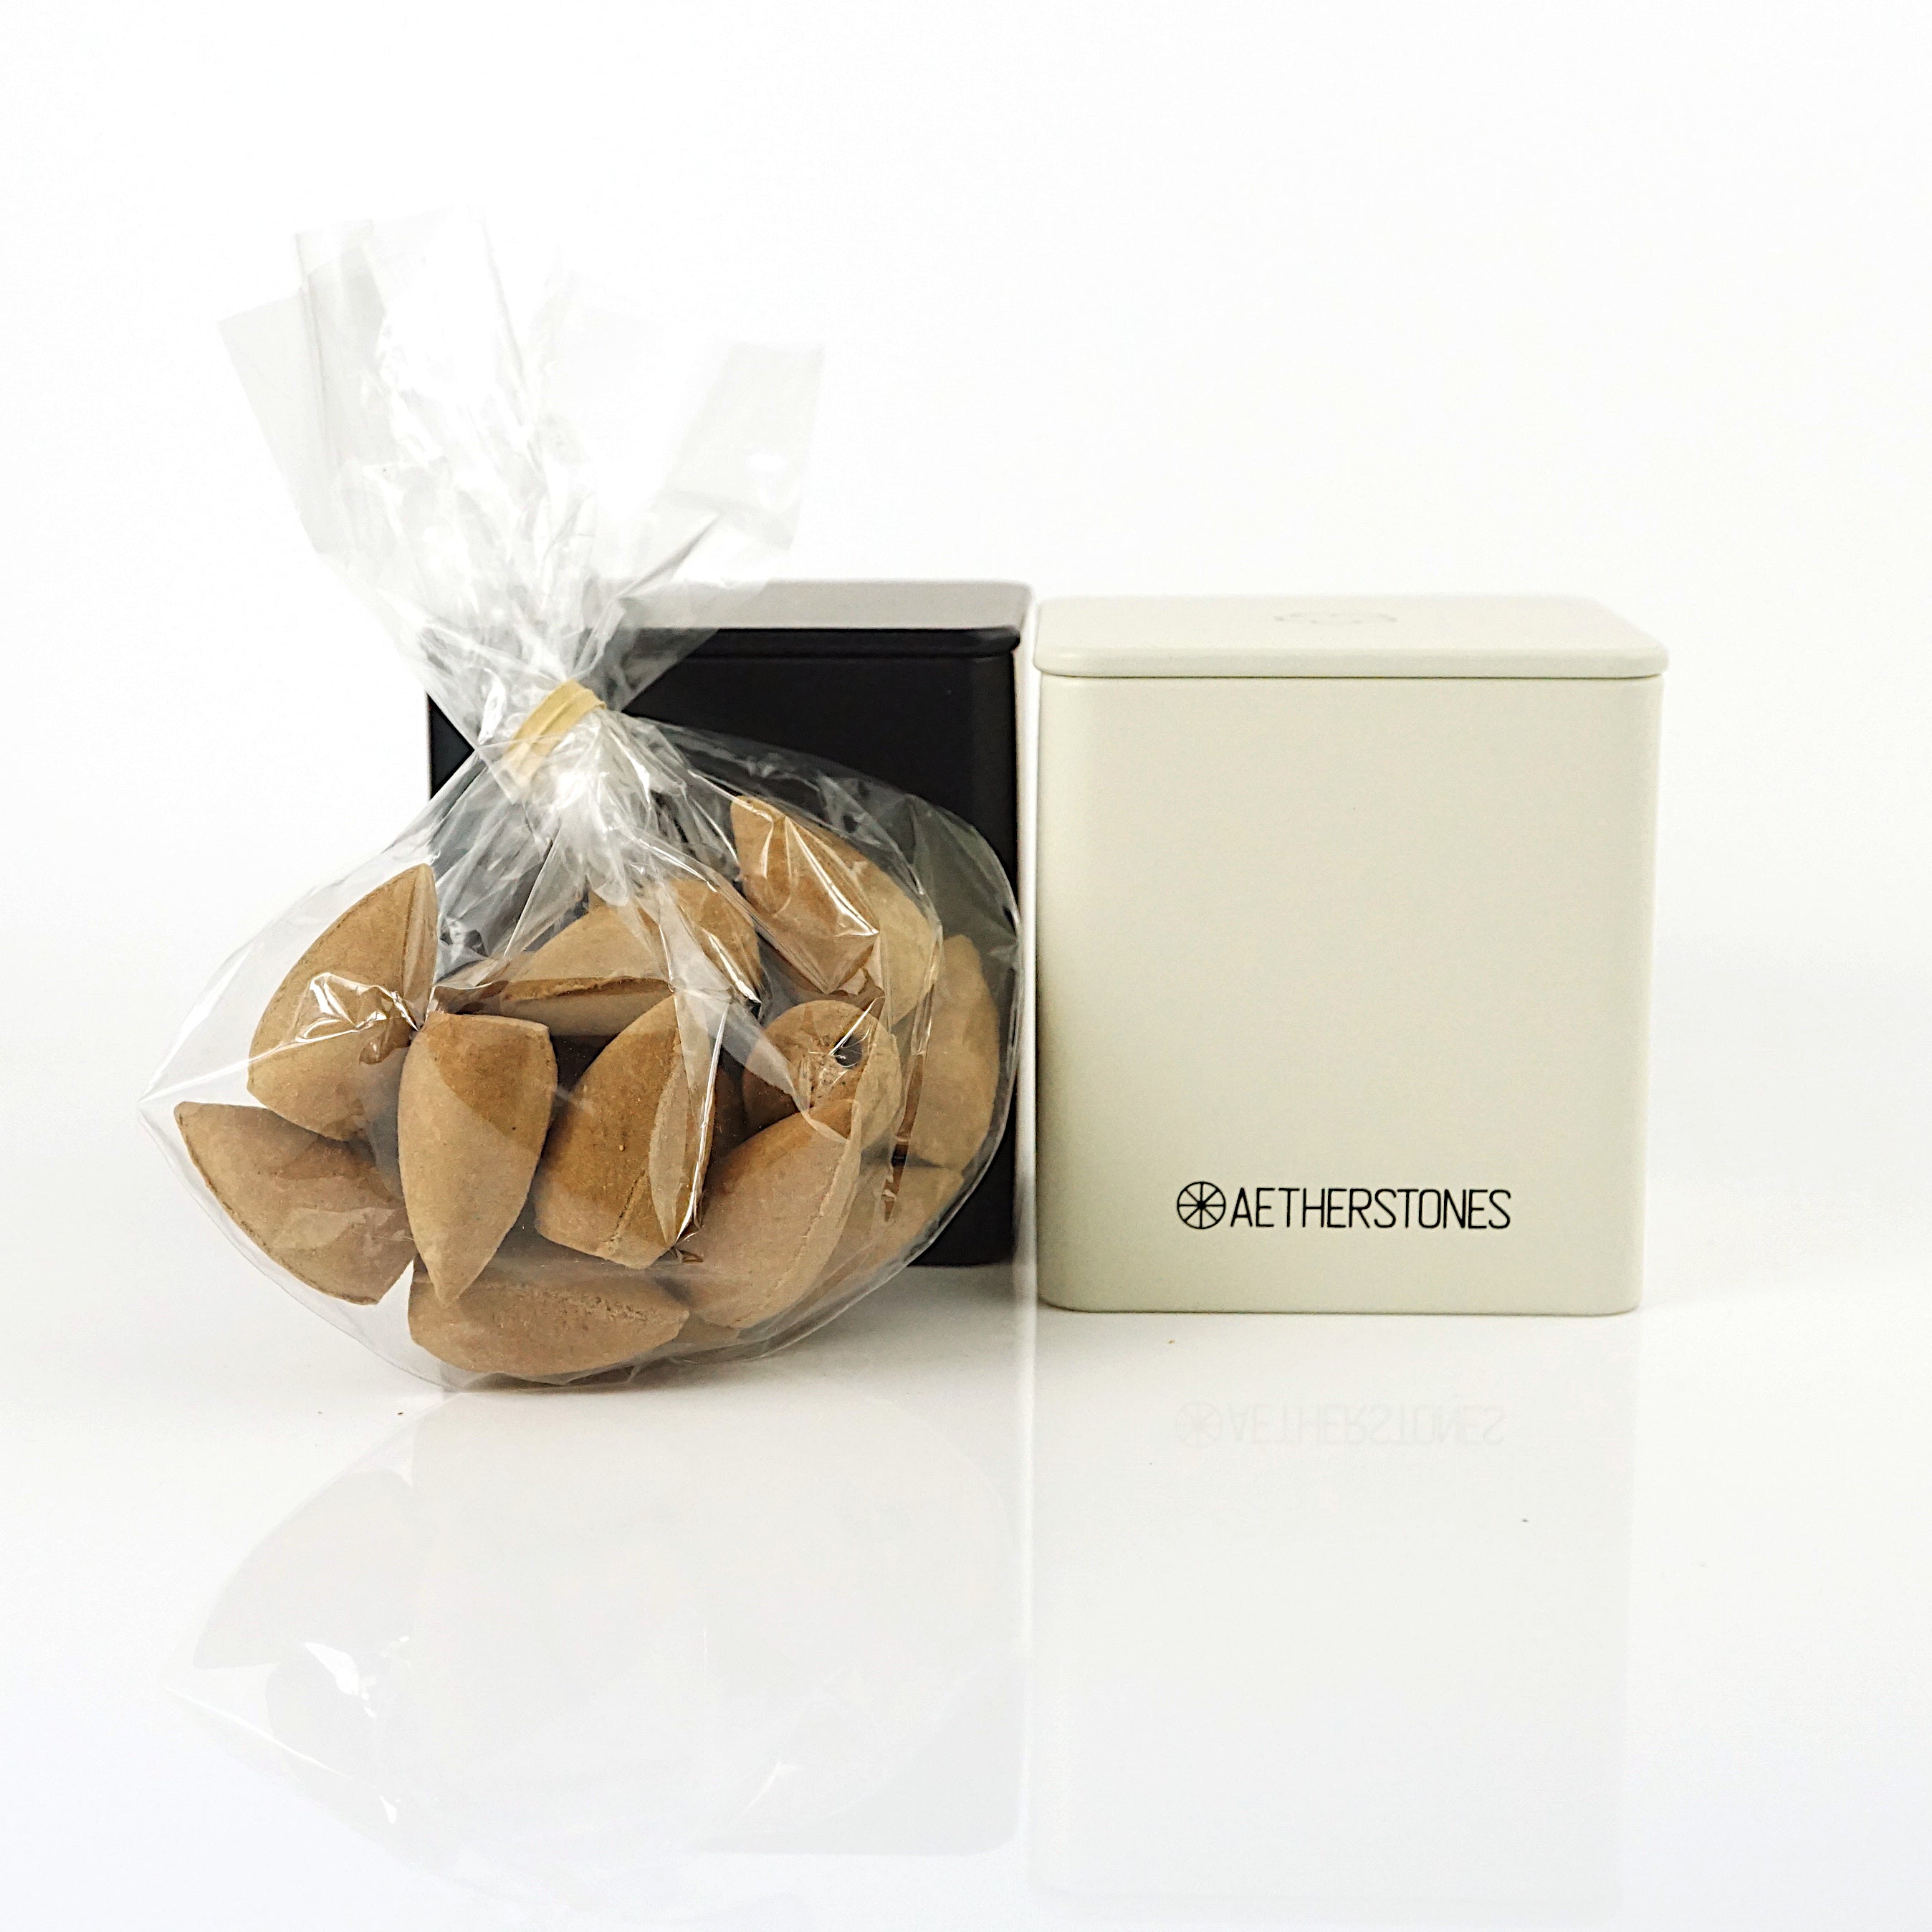 AETHERSTONES Natural Champa Backflow Incense Cones 15 Cones - Smudging, Cleansing and Purifying